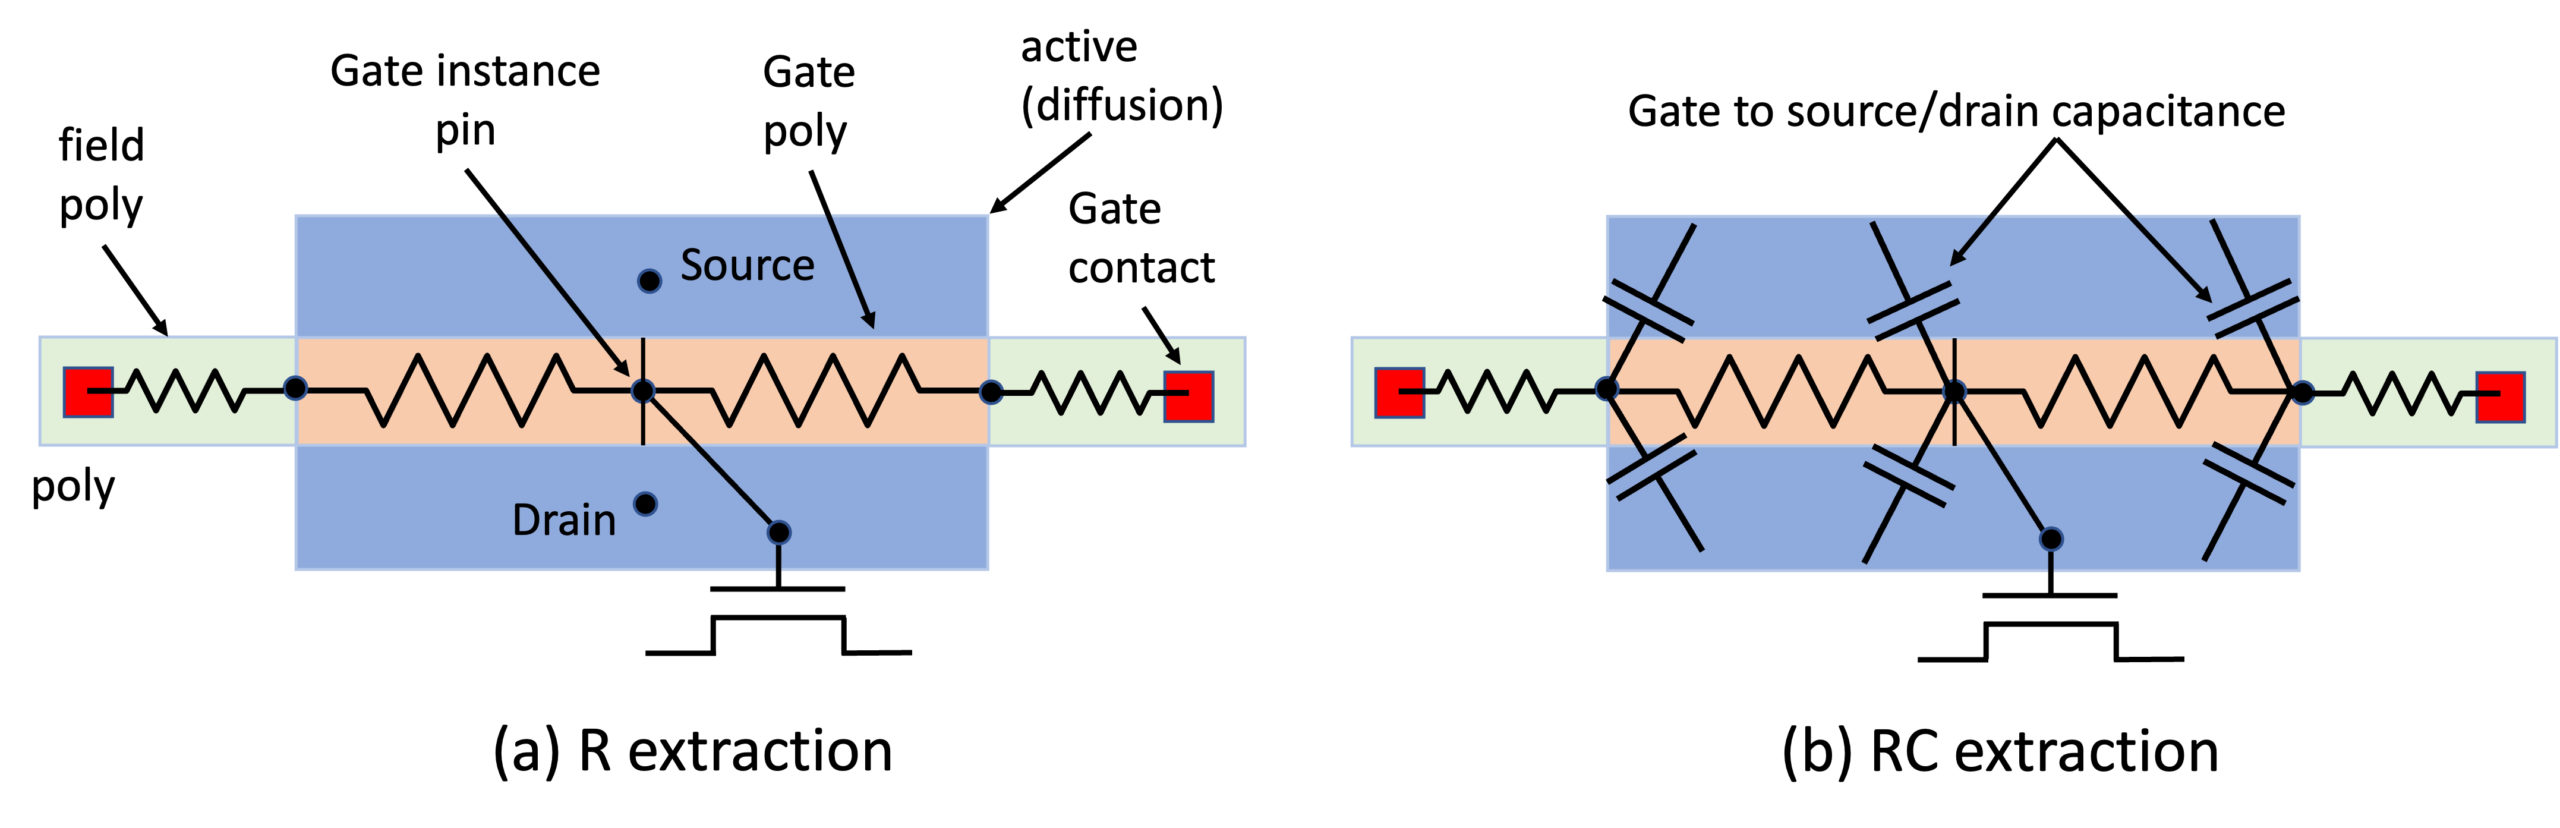 R and RC extraction around MOSFET gate.